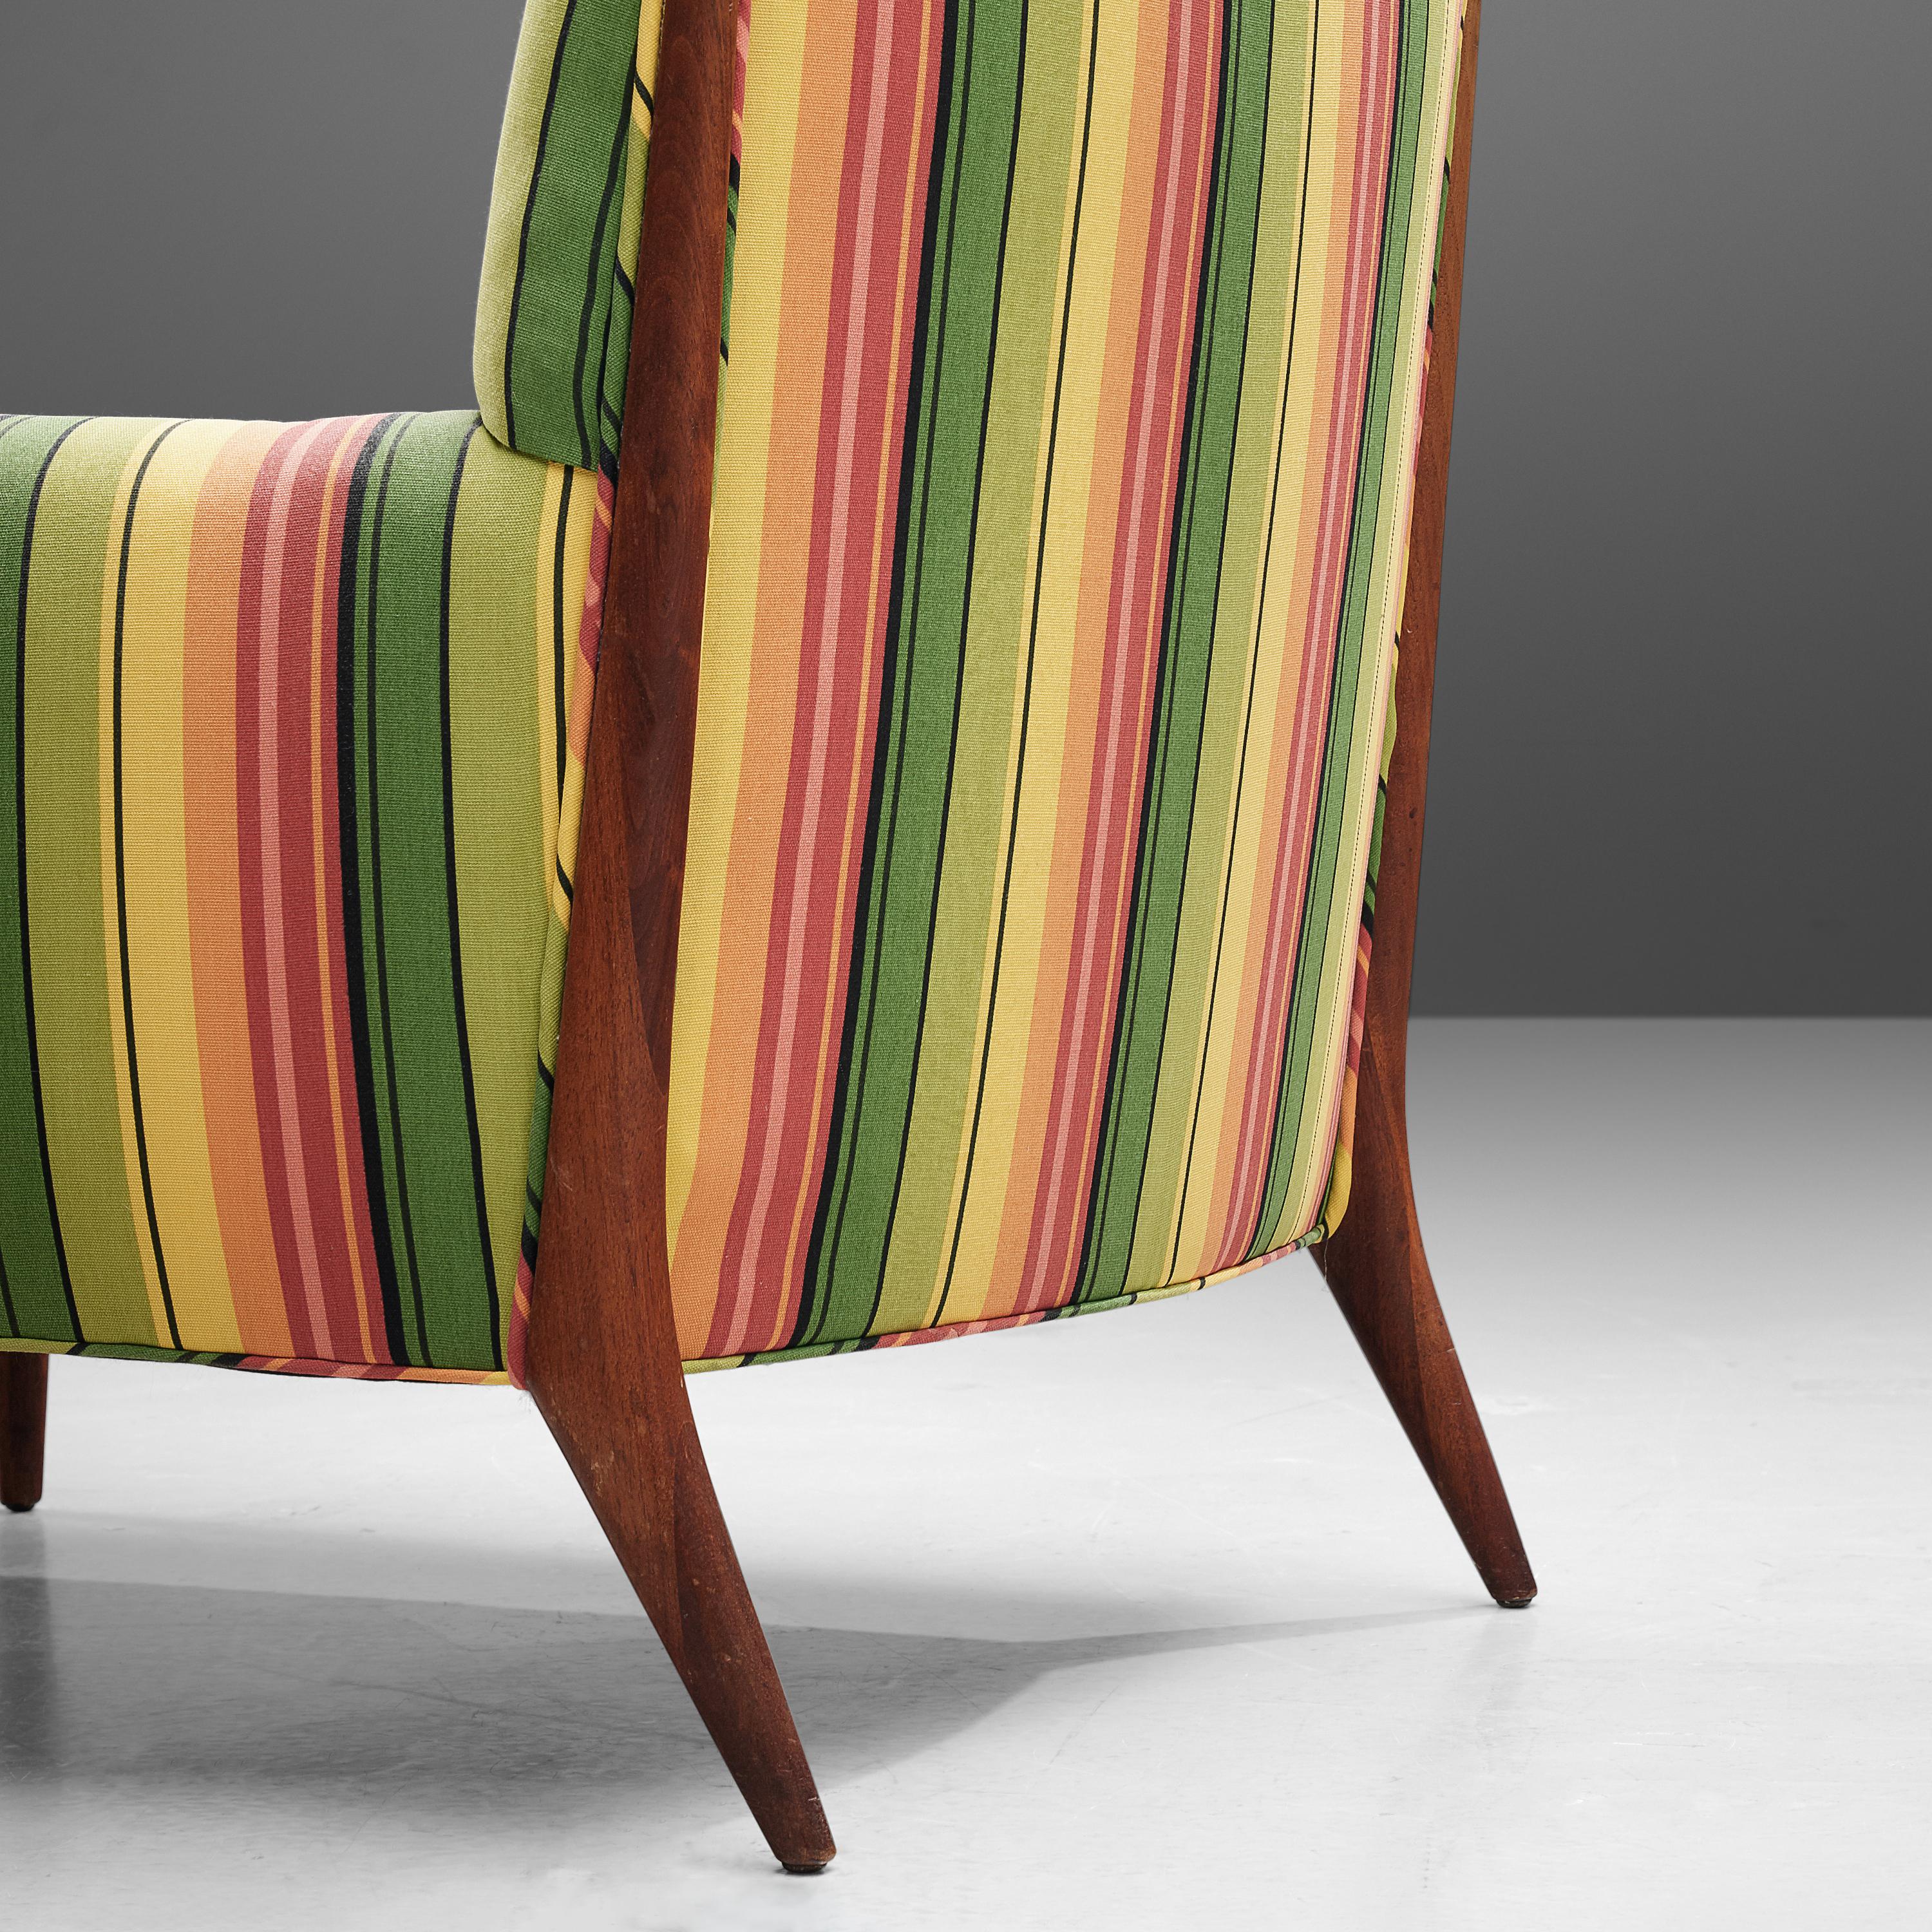 Mid-20th Century Jules Heumann Lounge Chairs in Colorful Striped Fabric